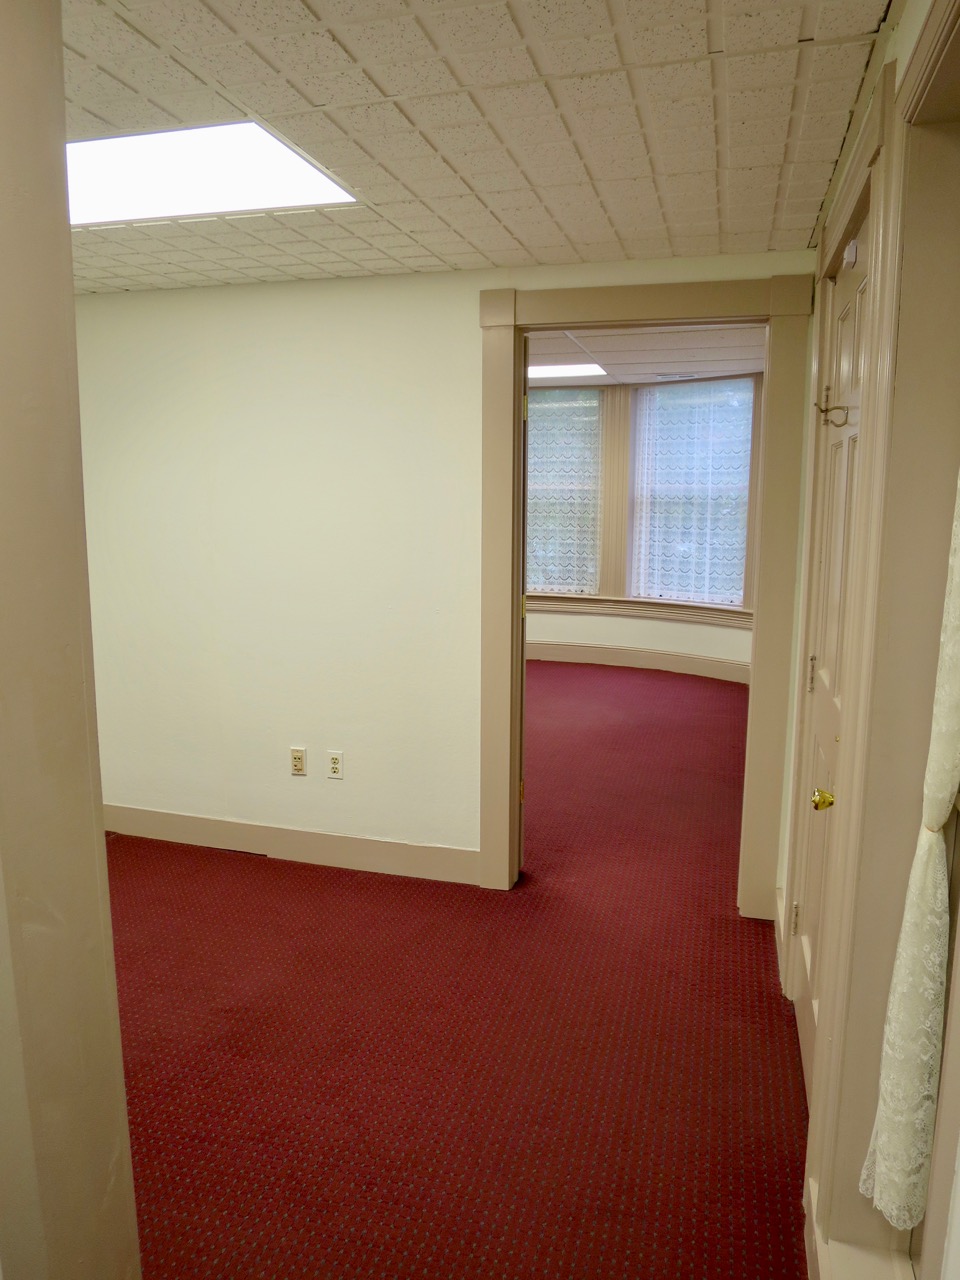 182 E. Main St.,Westminster,Maryland 21157,12 Rooms Rooms,4 BathroomsBathrooms,Office,E. Main St.,1137